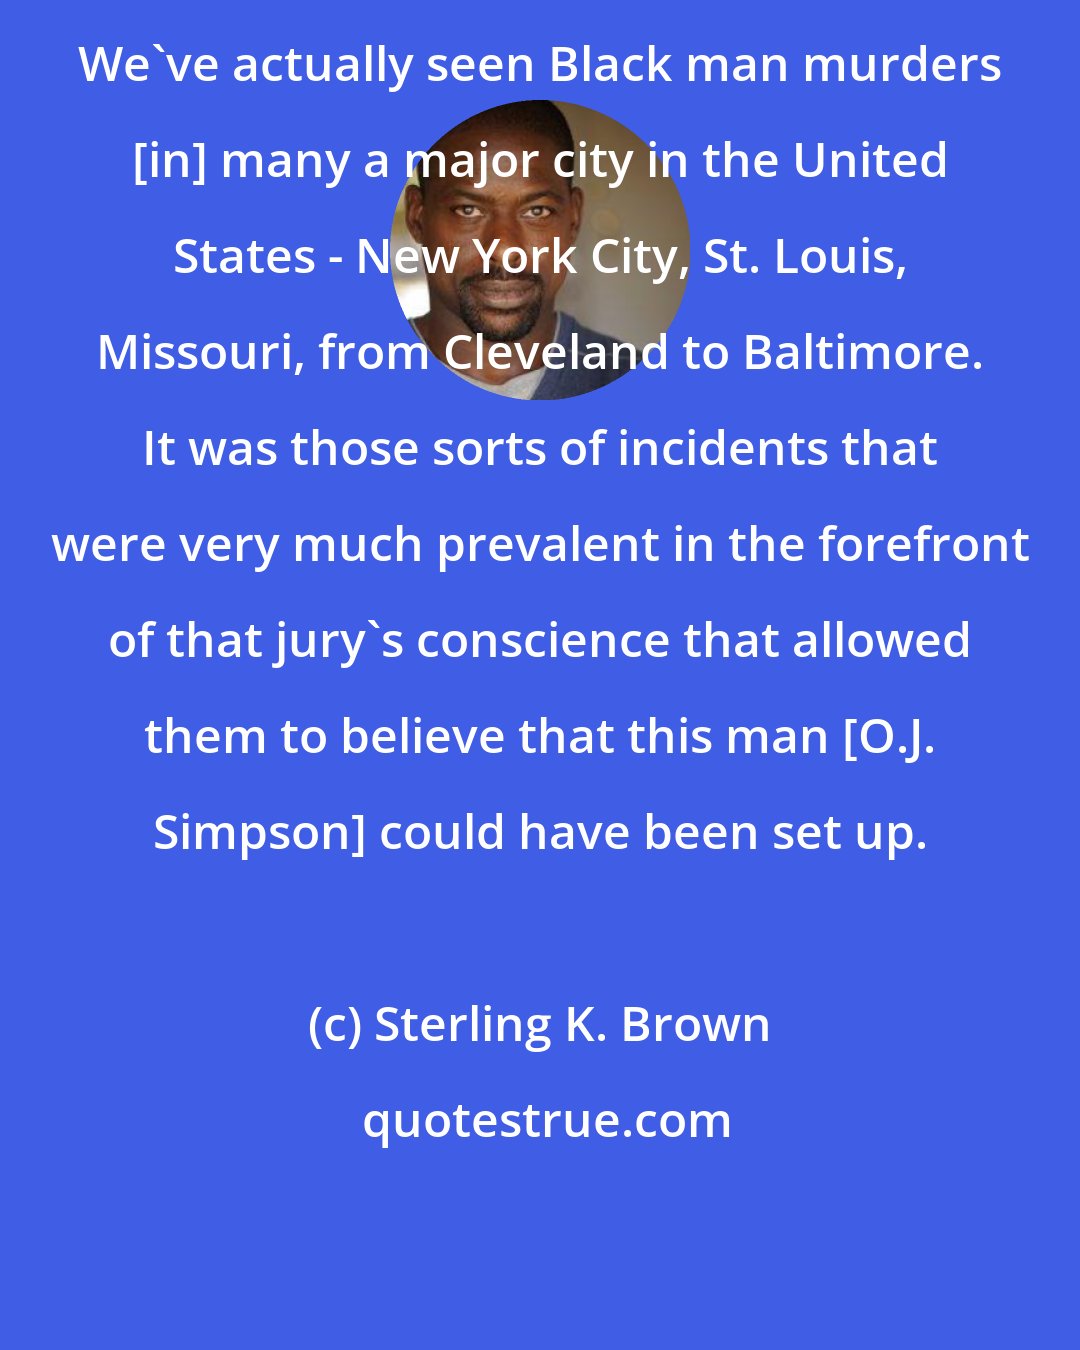 Sterling K. Brown: We've actually seen Black man murders [in] many a major city in the United States - New York City, St. Louis, Missouri, from Cleveland to Baltimore. It was those sorts of incidents that were very much prevalent in the forefront of that jury's conscience that allowed them to believe that this man [O.J. Simpson] could have been set up.